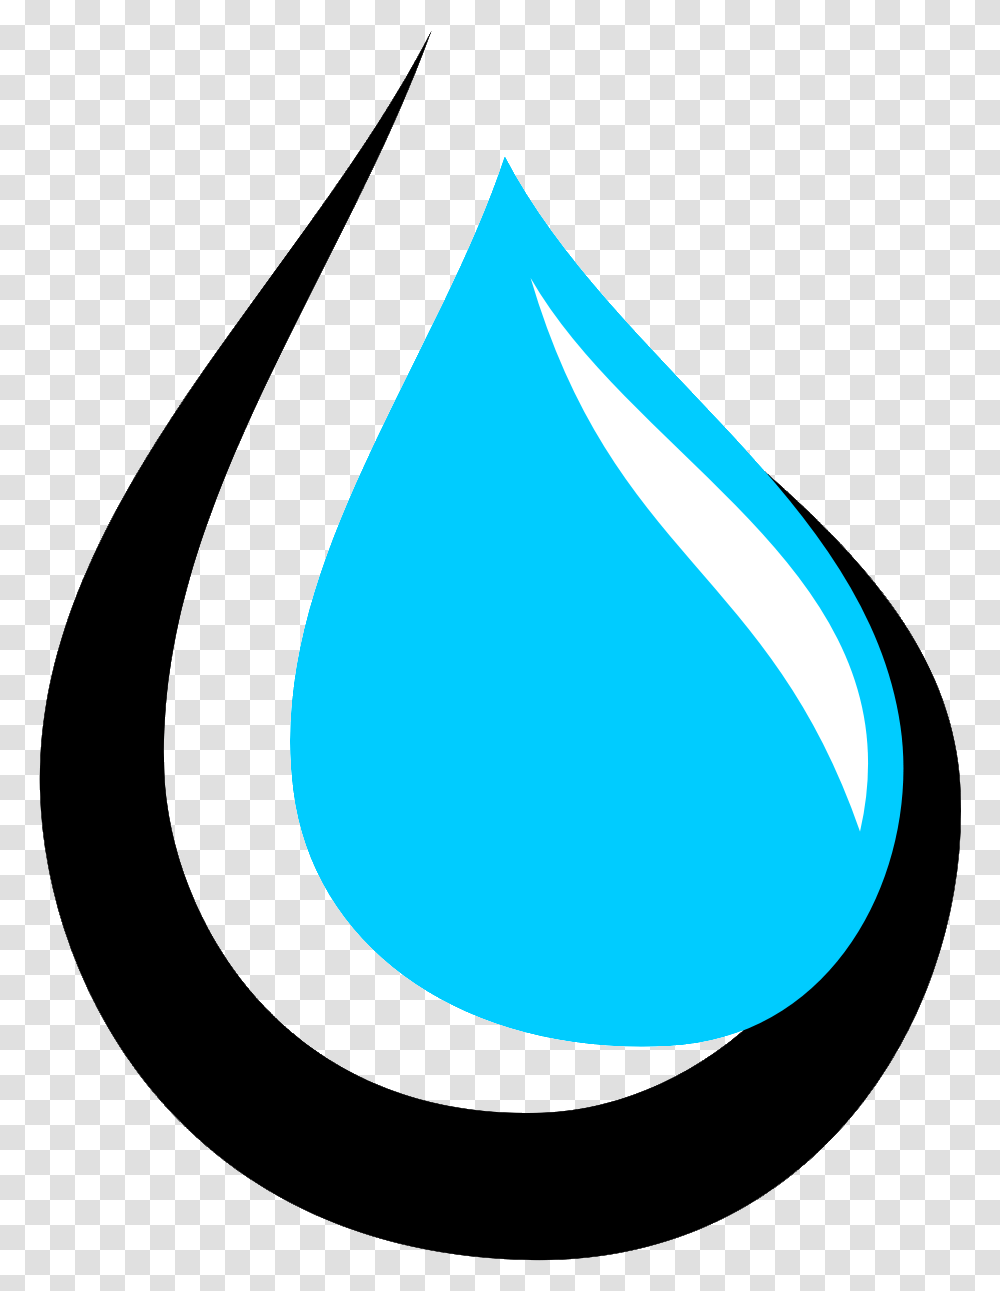 Water Drop Drops Clipart X Alkaline Water Icon, Home Decor, Droplet Transparent Png